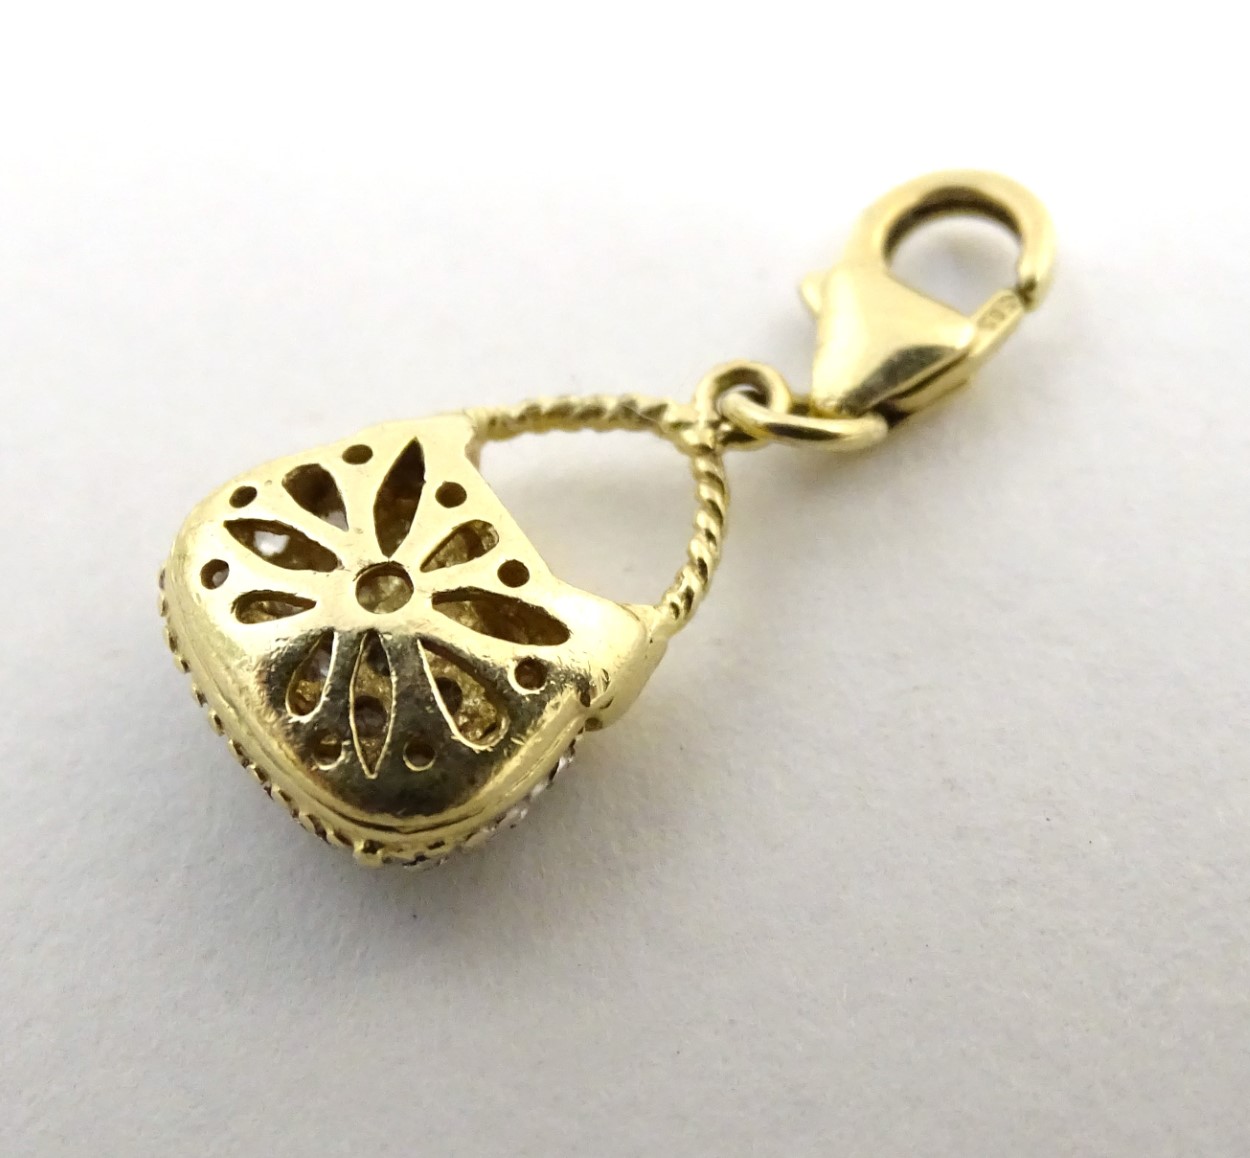 A 14ct gold pendant / fob formed as a basket set with white stones. - Image 2 of 5